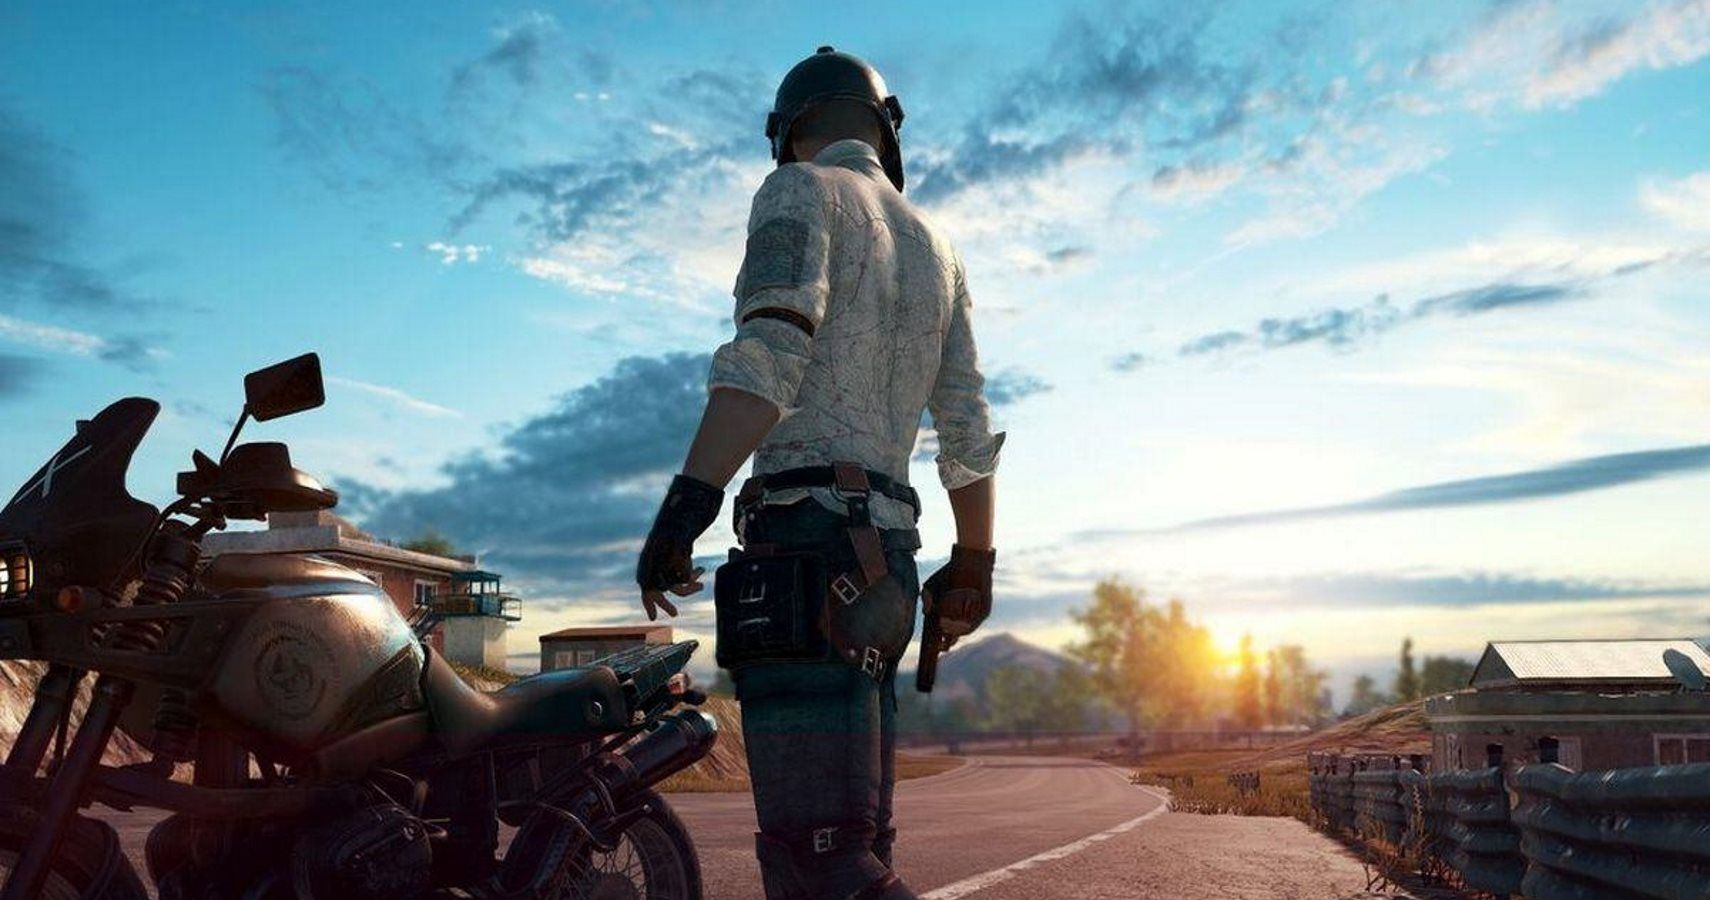 PUBG Is Changing Its Blue Circle Of Death And Targeting Cheaters For Bans